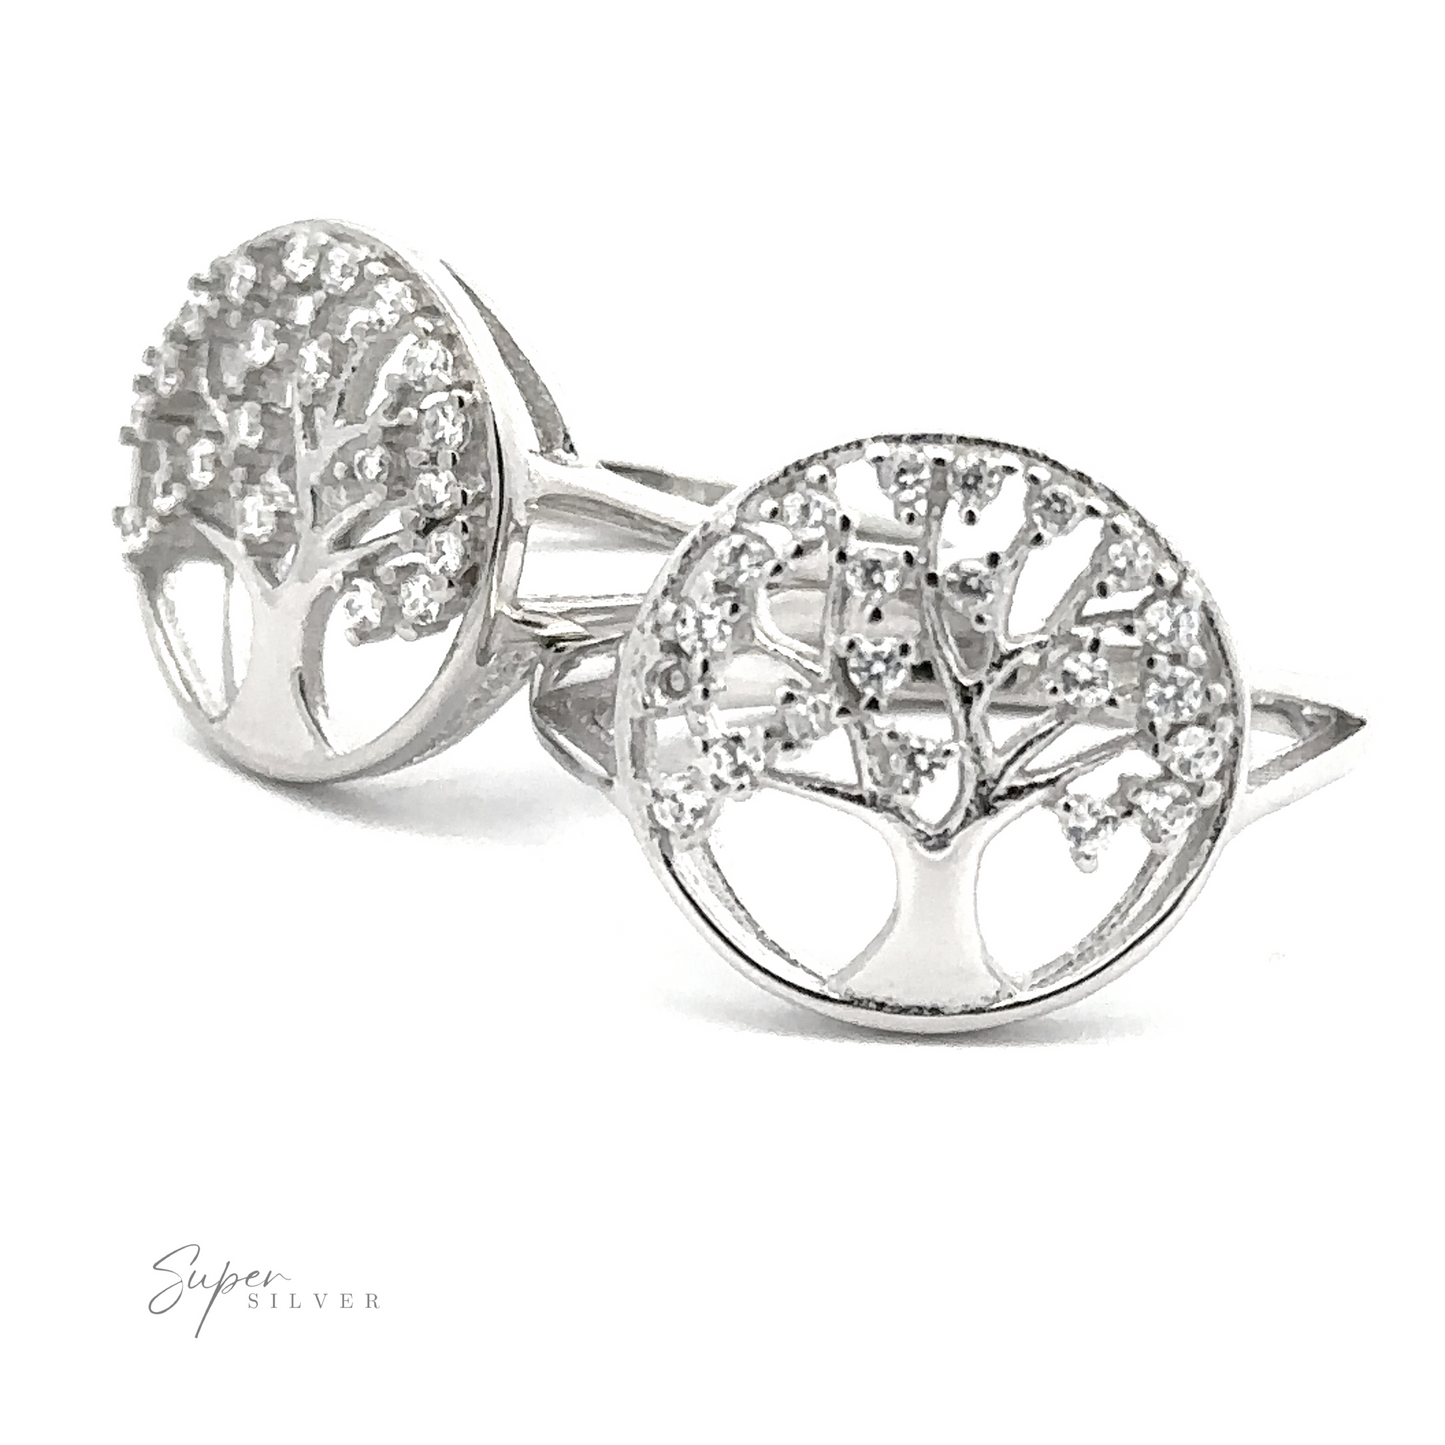 
                  
                    Two Tree Of Life Ring Cubic Zirconia Stones with intricate tree designs, adorned with delicate Cubic Zirconia stones, placed upright on a white background. The rings are labeled "Super Silver" in the corner.
                  
                